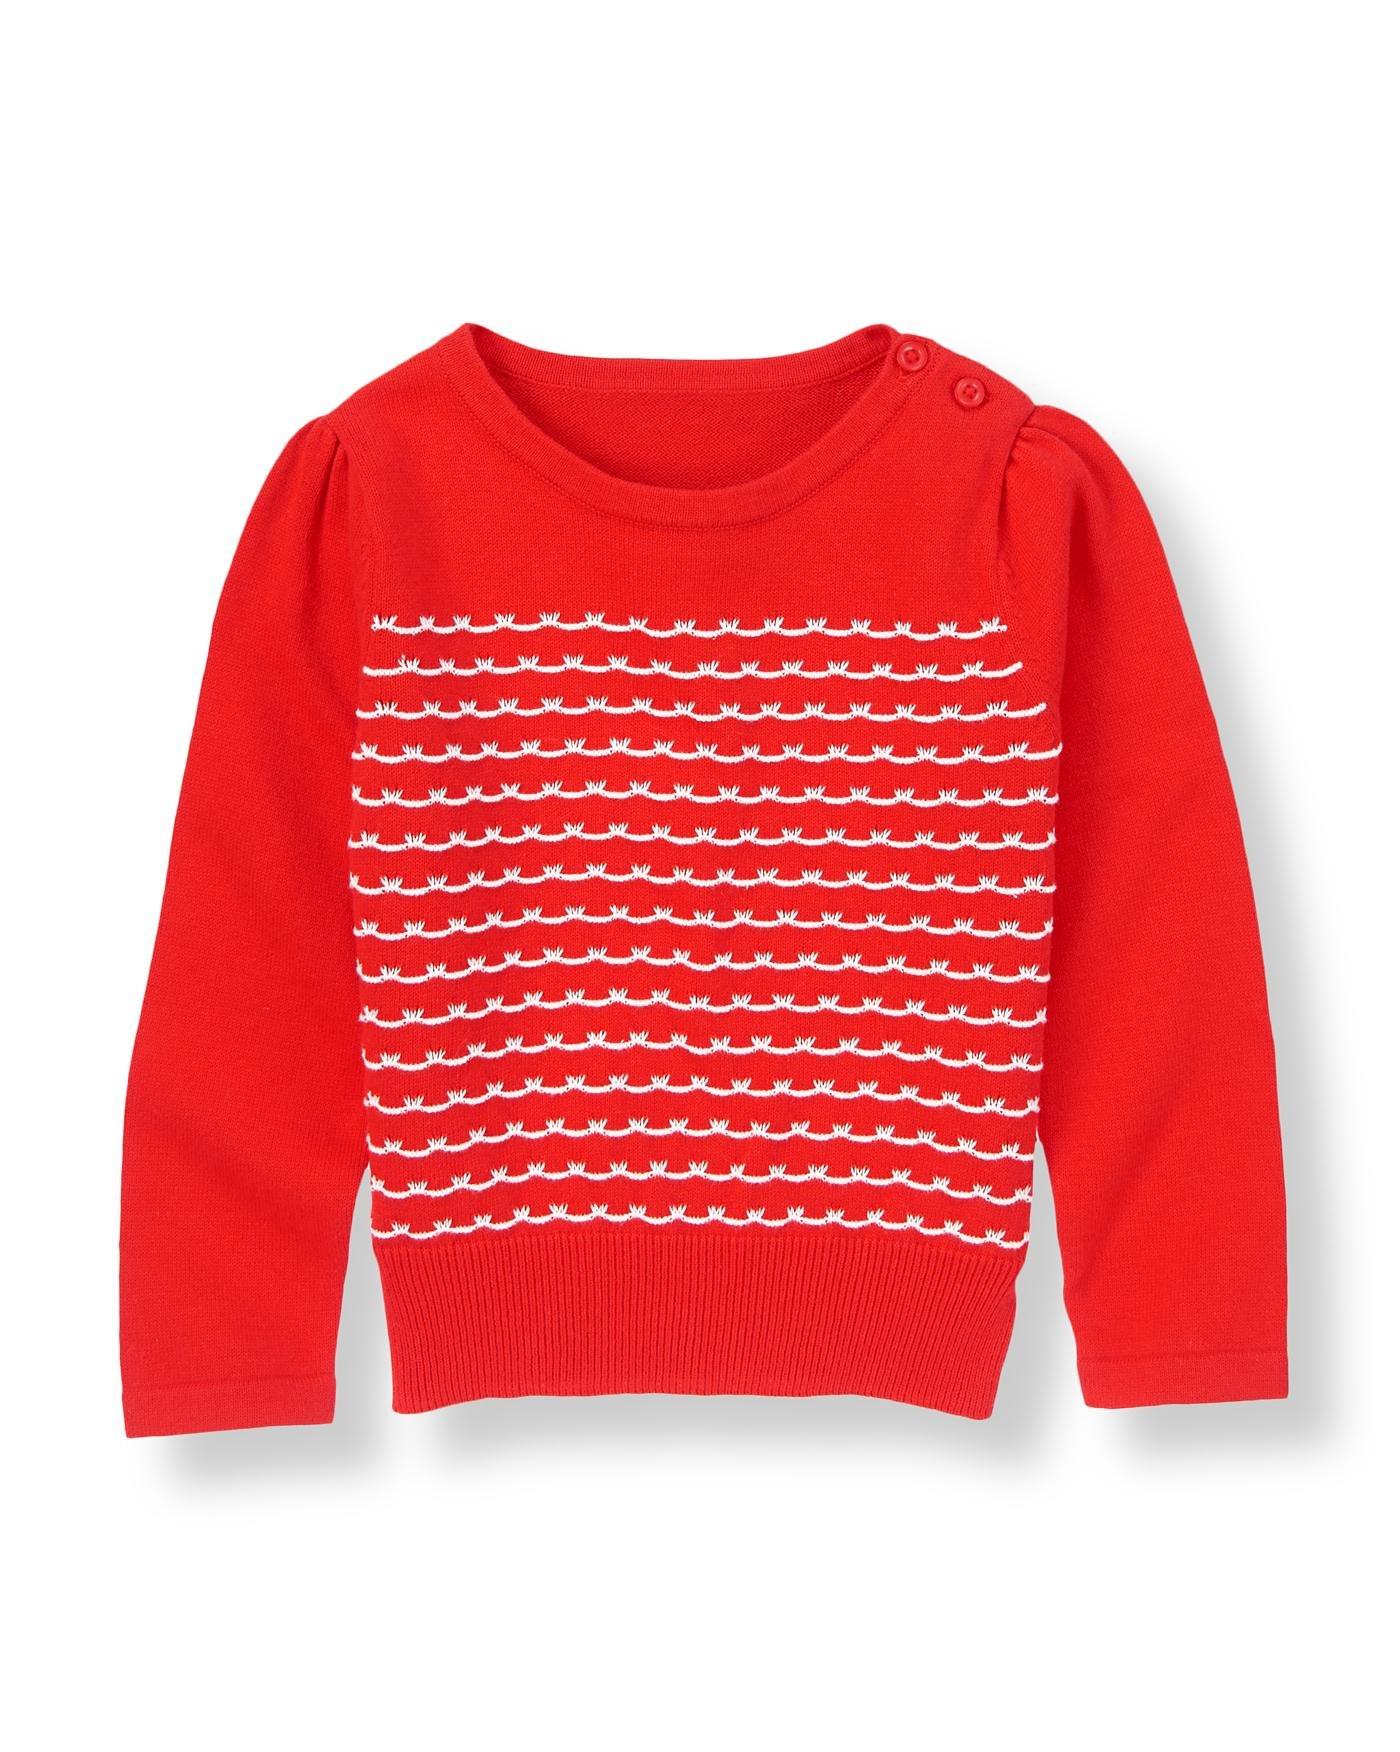 Scallop Stripe Sweater image number 0